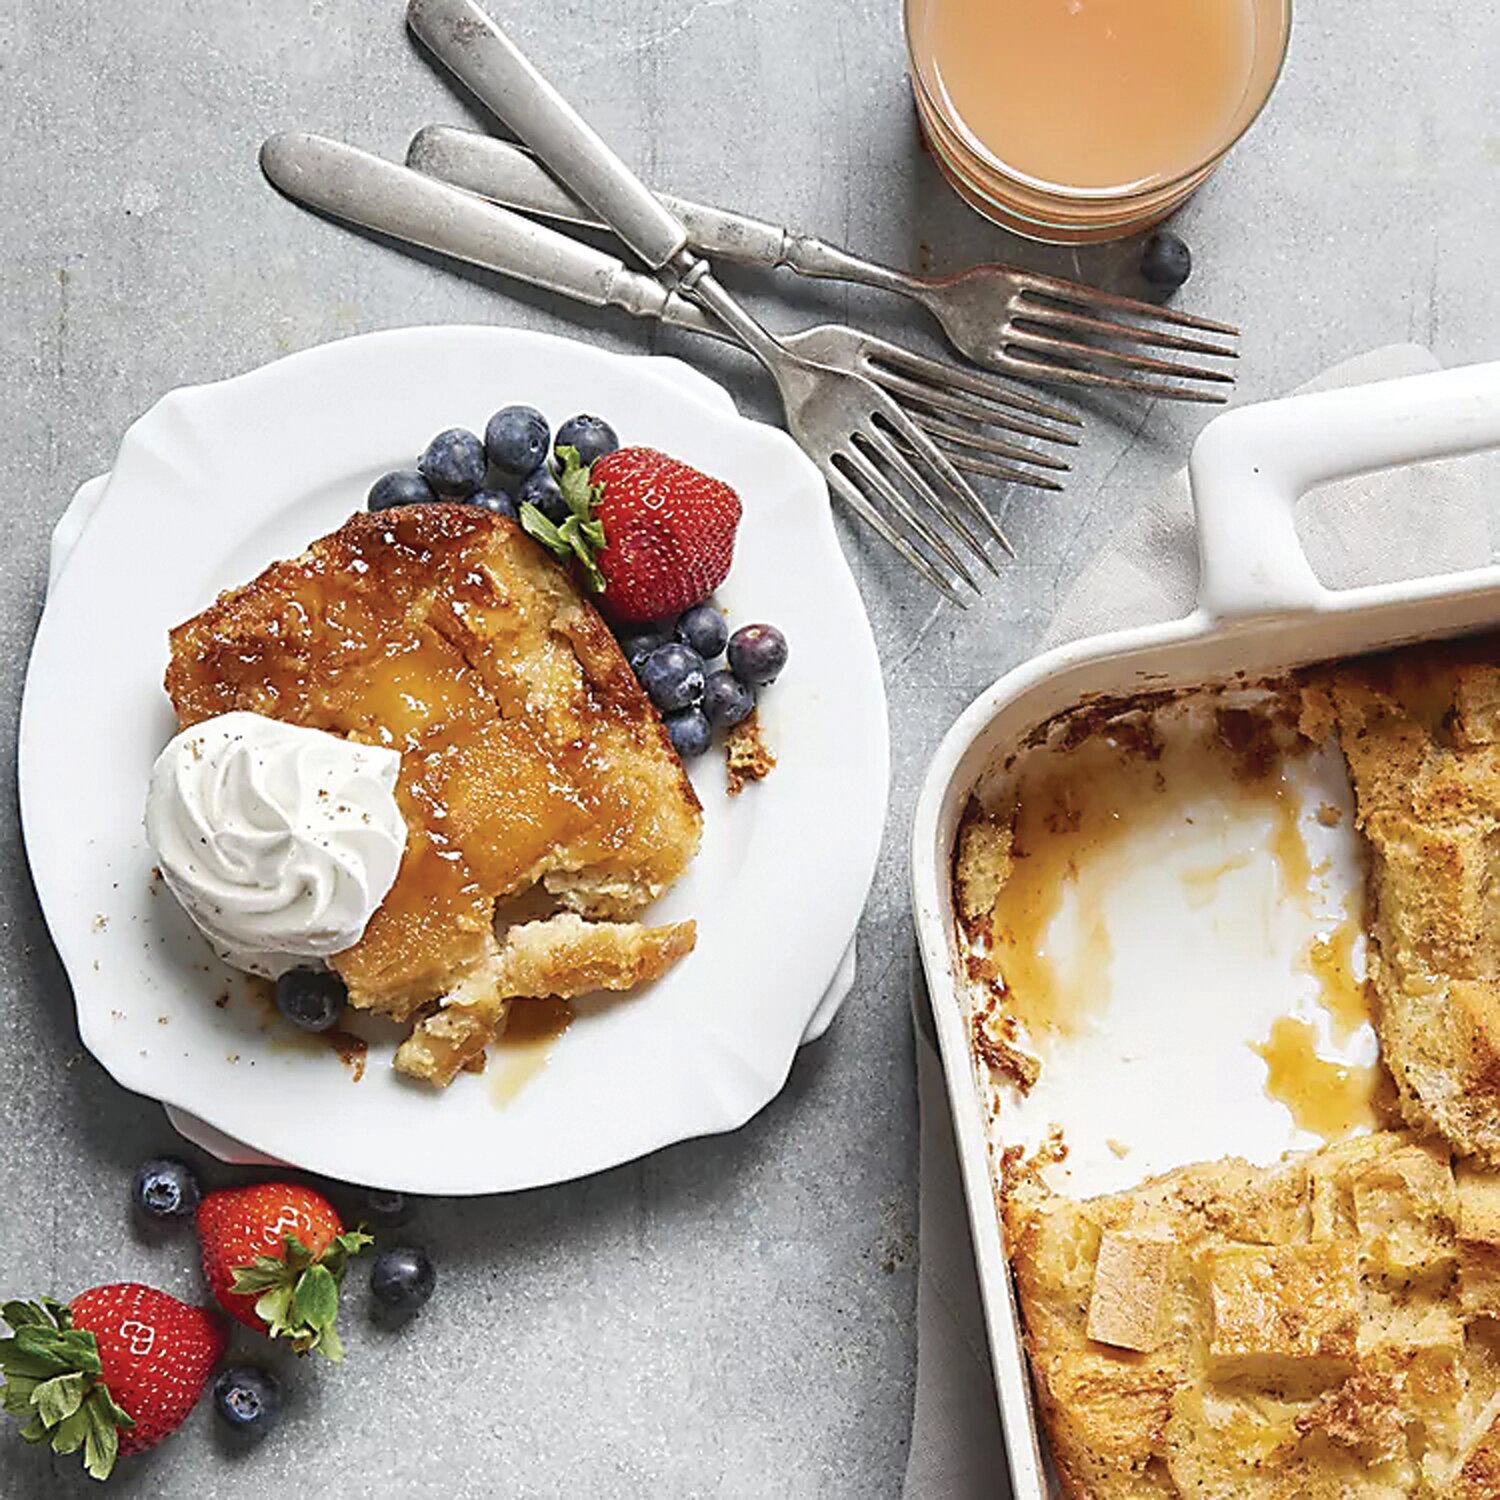 French toast casserole can be put together the night before, then baked in the morning.